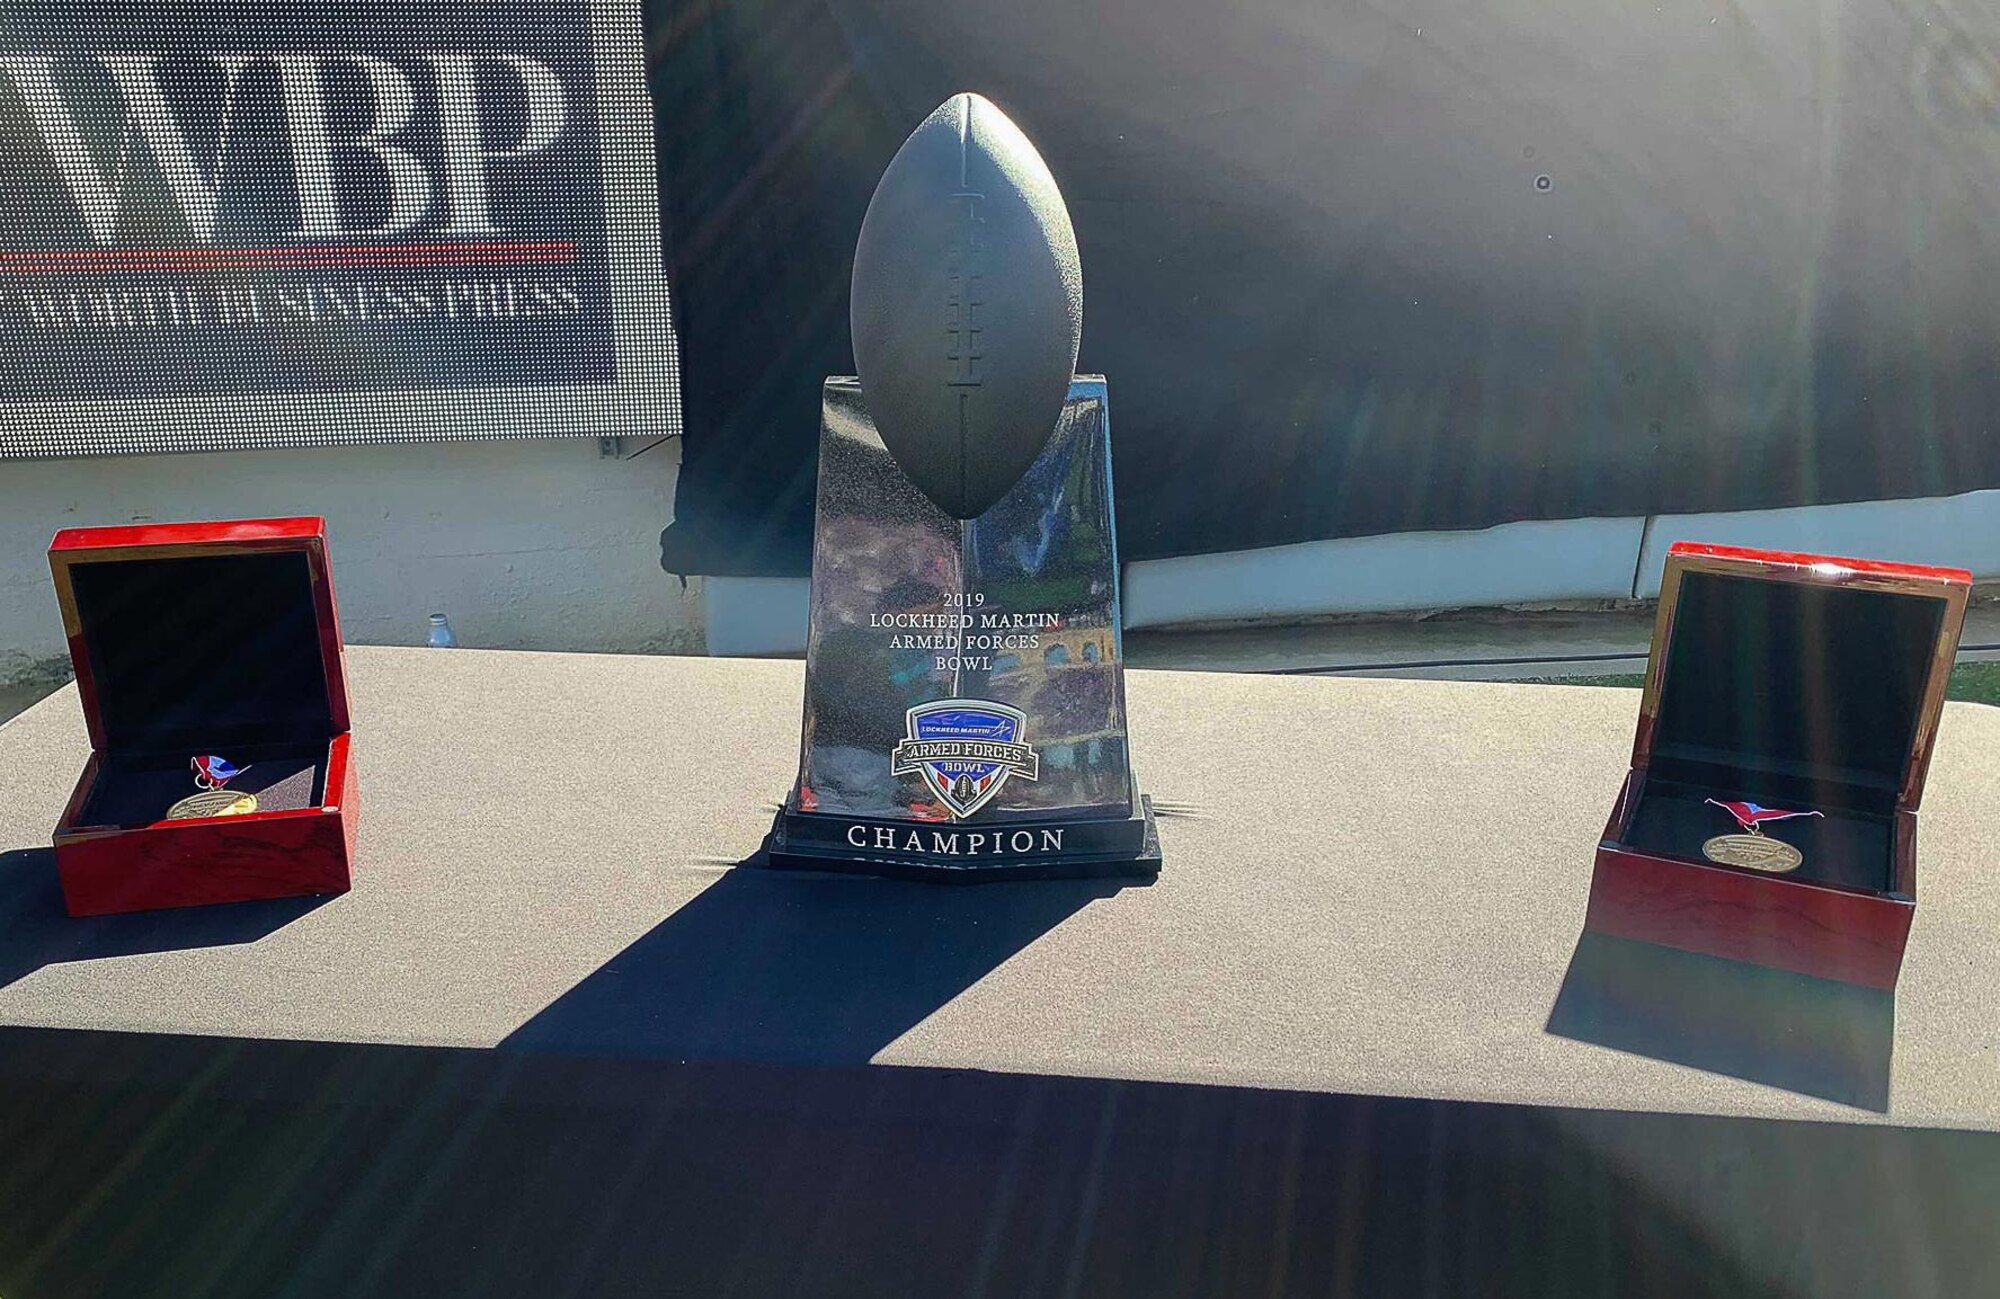 The trophy for the Lockheed Martin Armed Forces Bowl, which is made of decommissioned metal parts from each military branch, stands between the two player of the game medals wait to be presented at the conclusion of the game on January 4, 2020 in Fort Worth, Texas. Tulane University beat the University of Southern Mississippi 30 – 13. (U.S. Air Force photo by Capt. Jessica Gross)